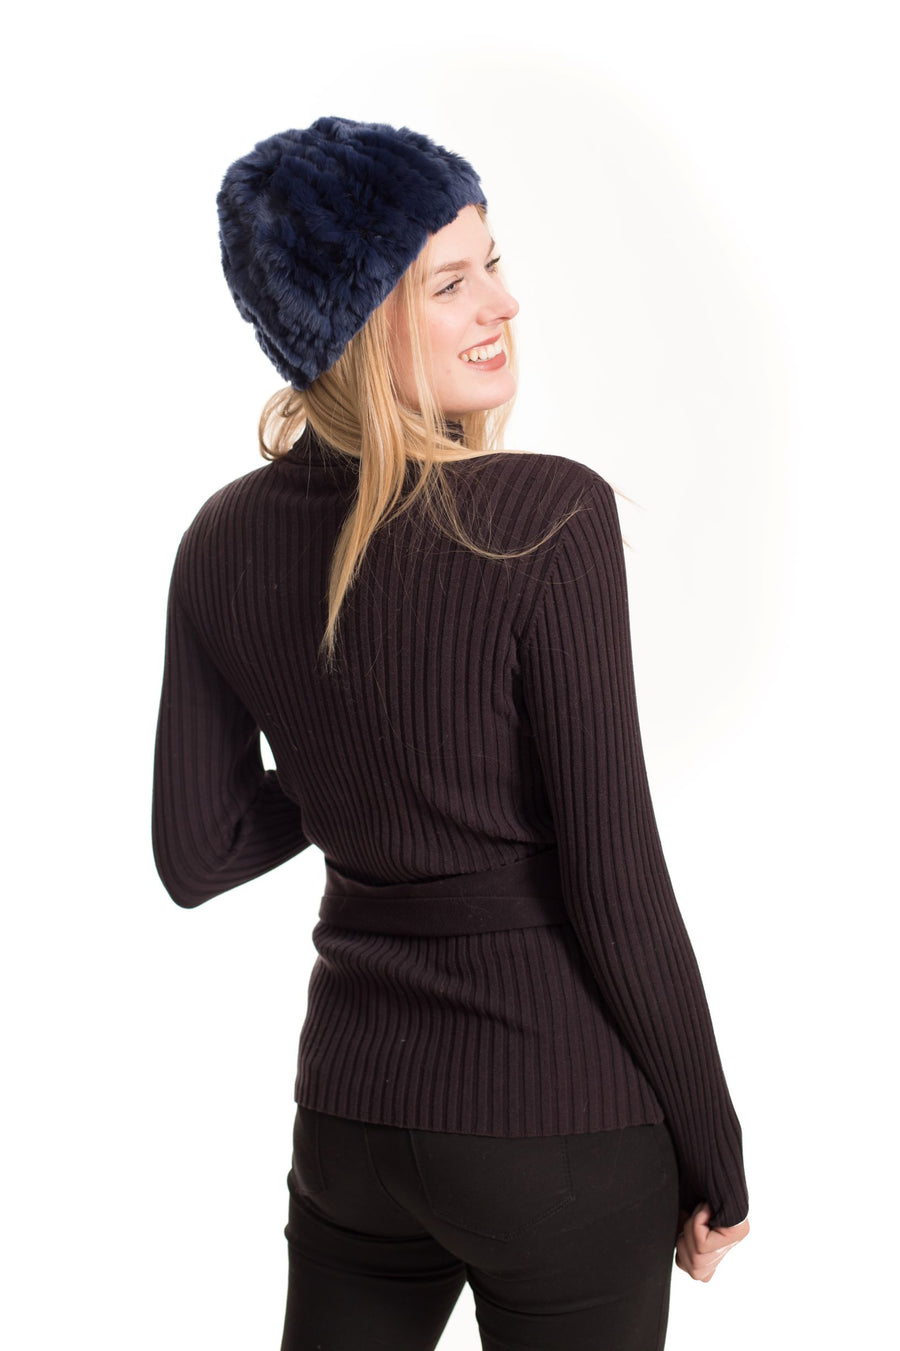 [Special] Neck Warmer and Beanie Hat - Navy